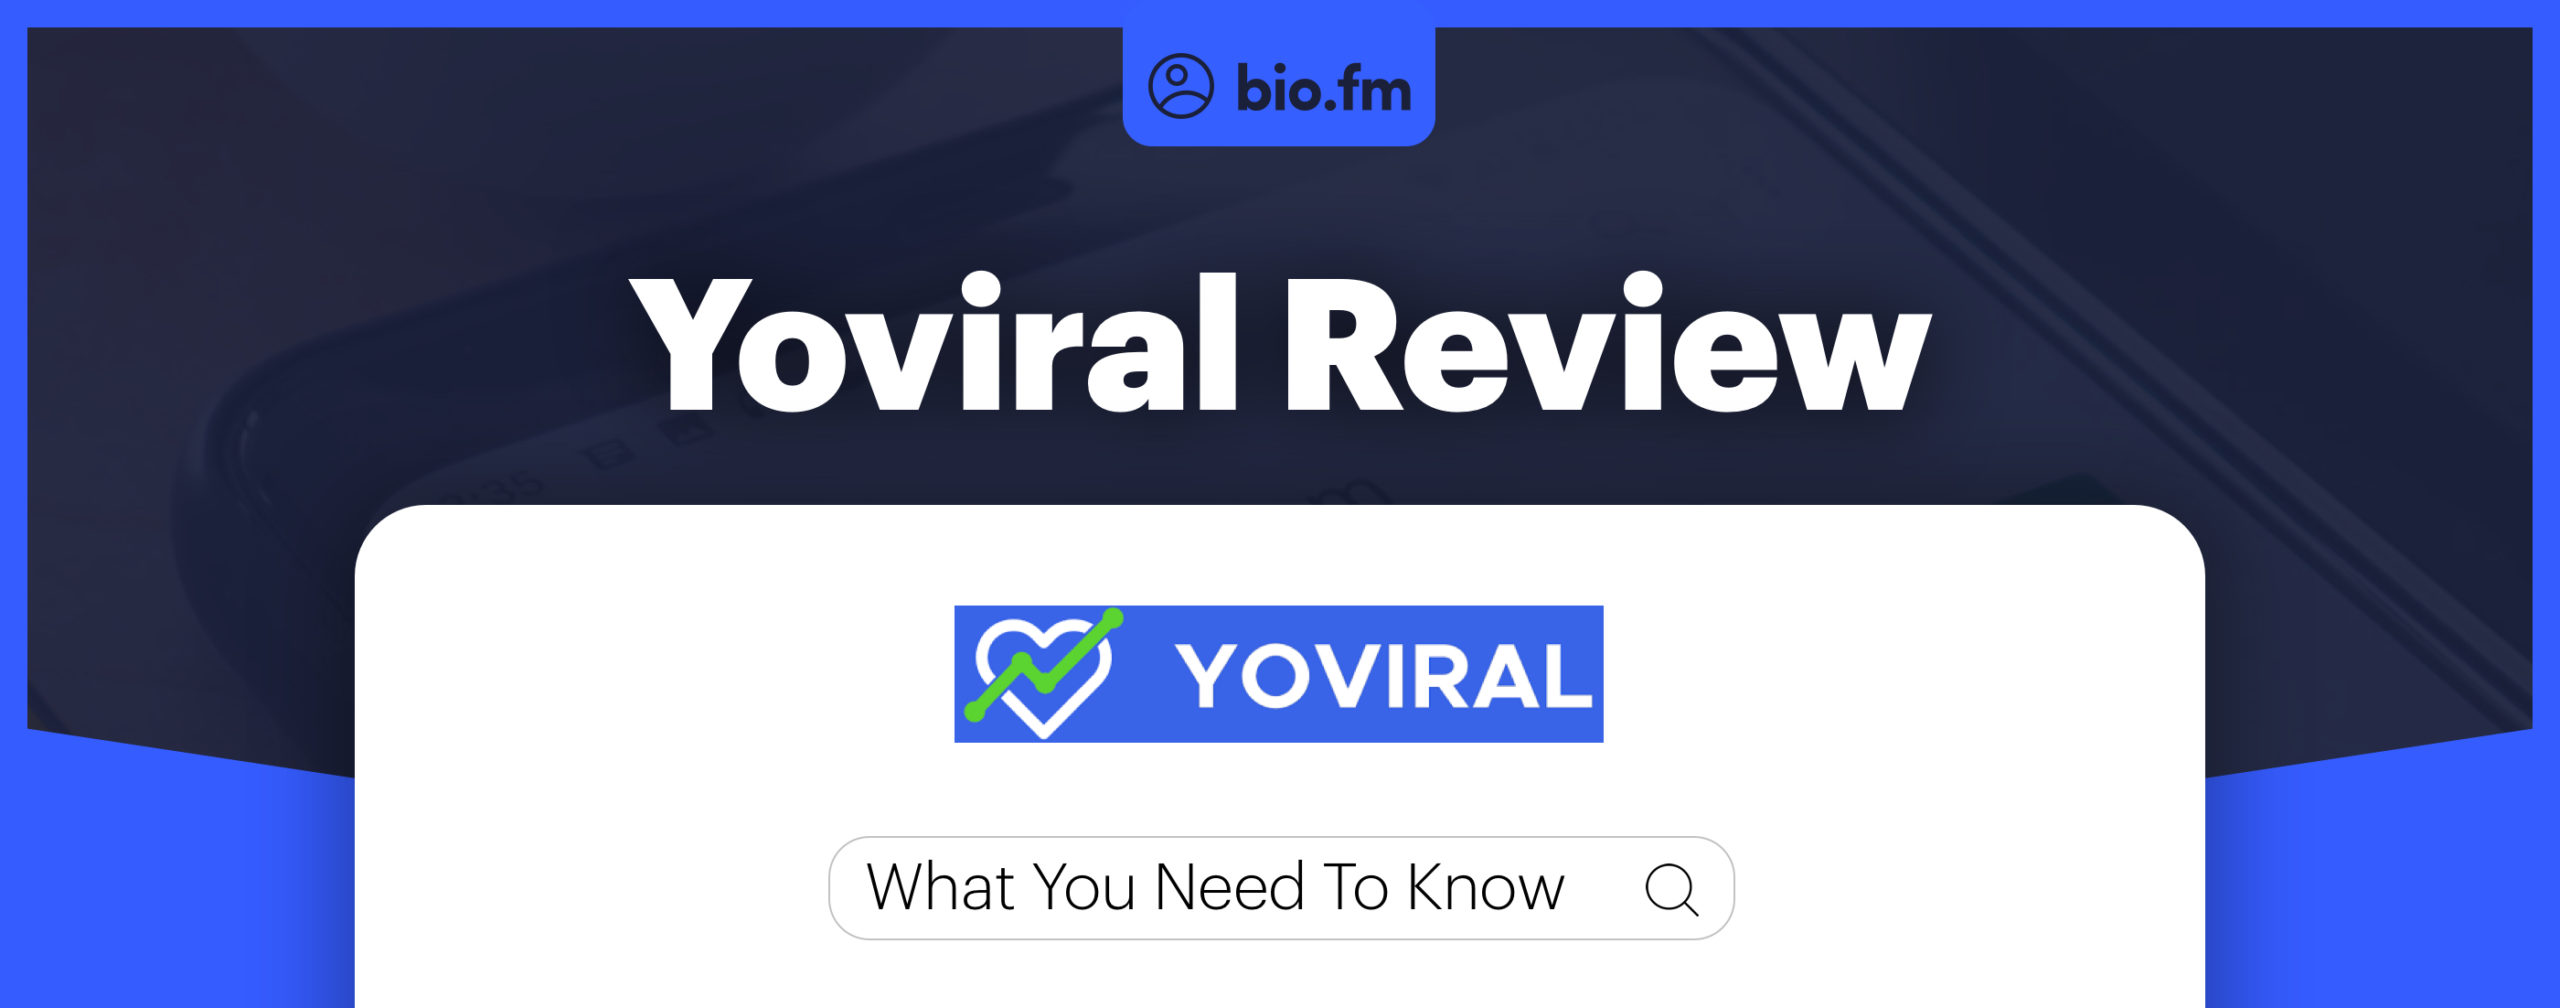 yoviral review featured image